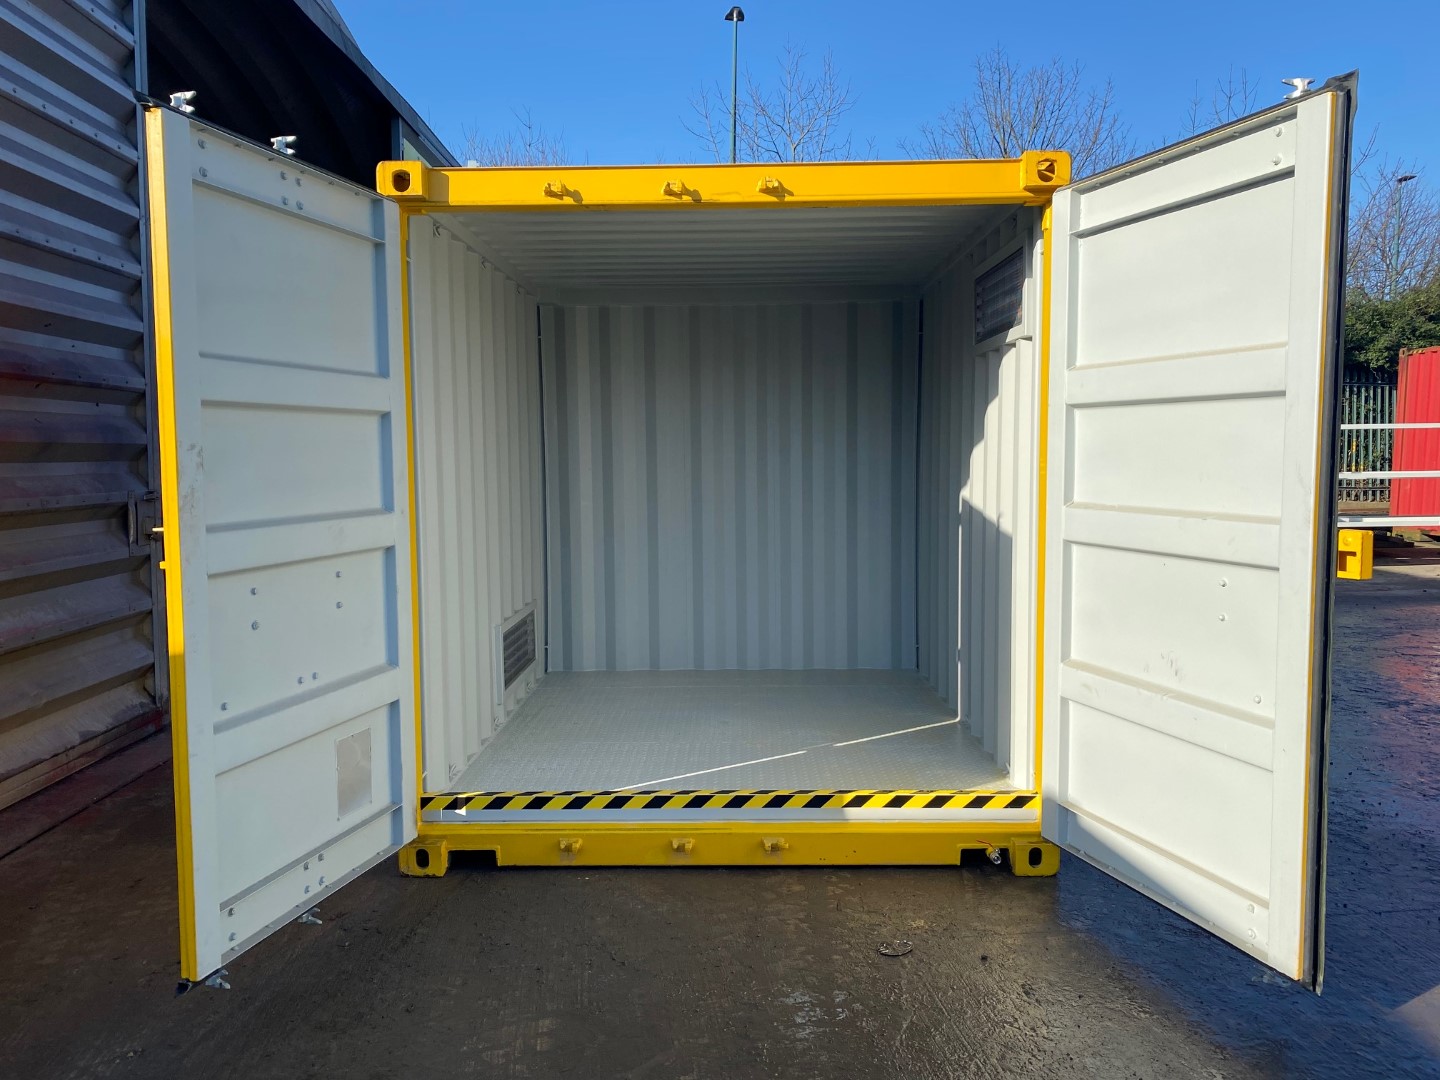 Providers of Secure Chemical Storage Units